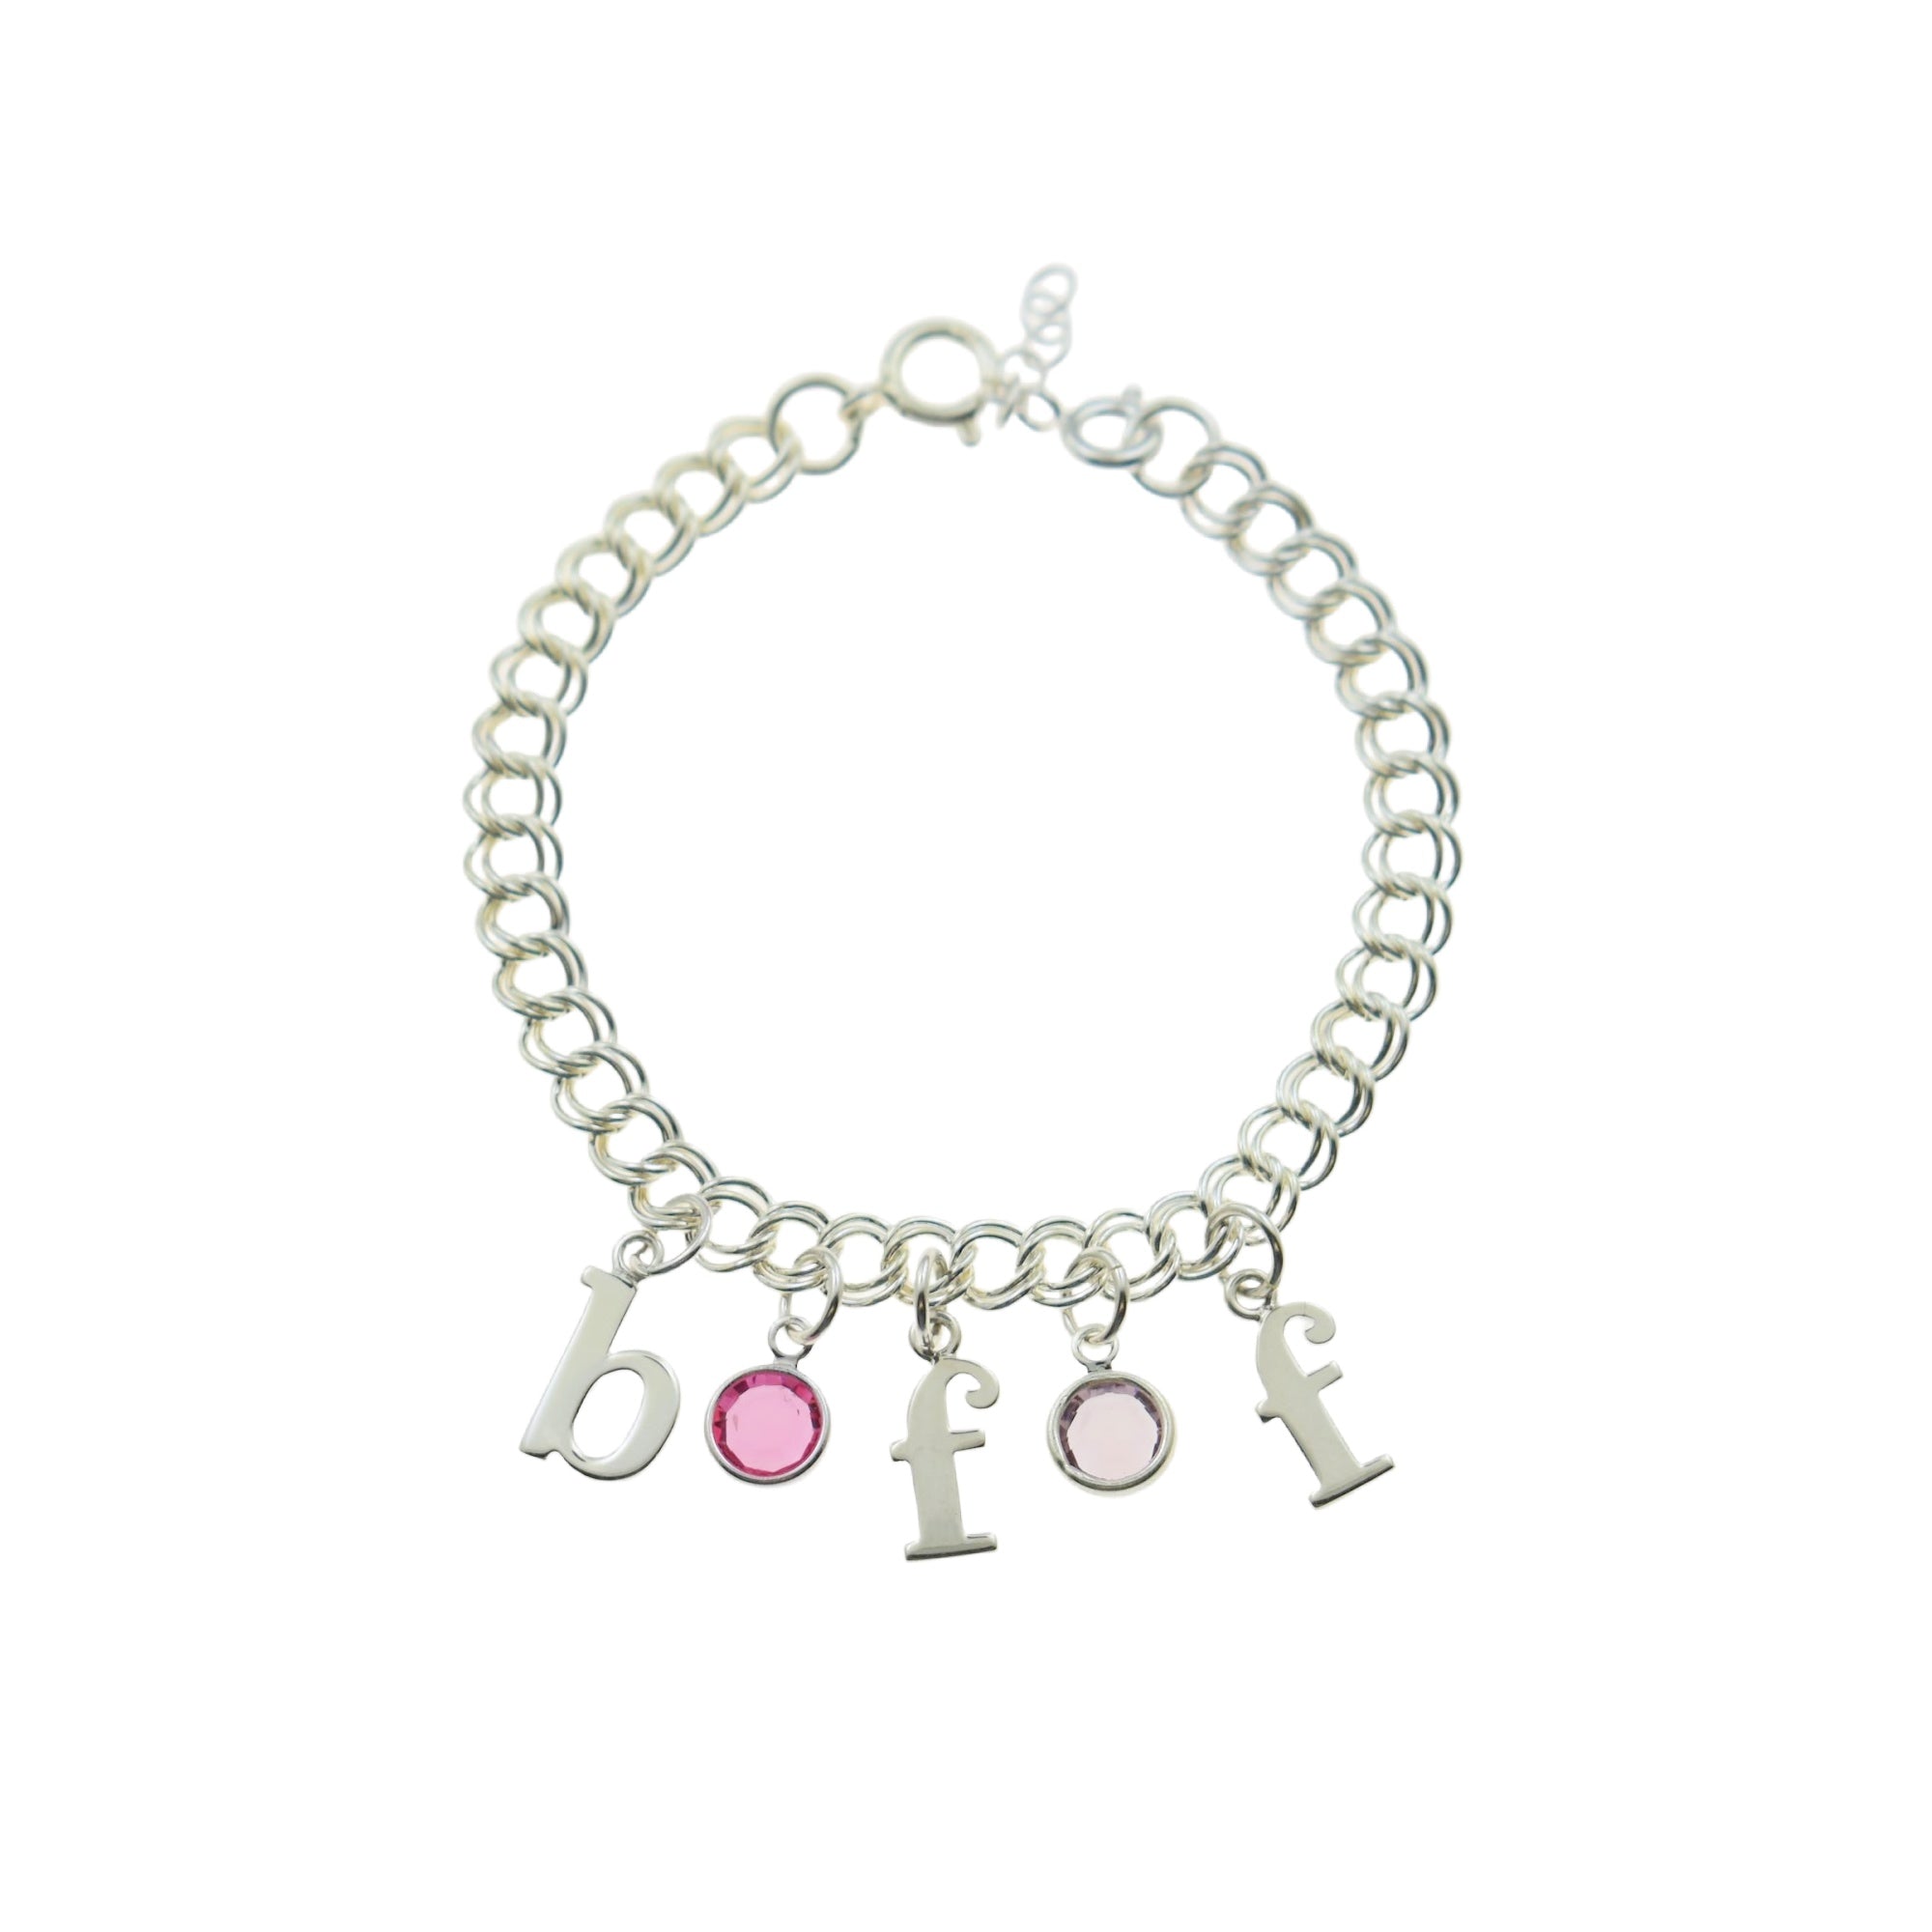 6mm Sterling Silver Bead Bracelet with Removable Personalized Monogram Charm